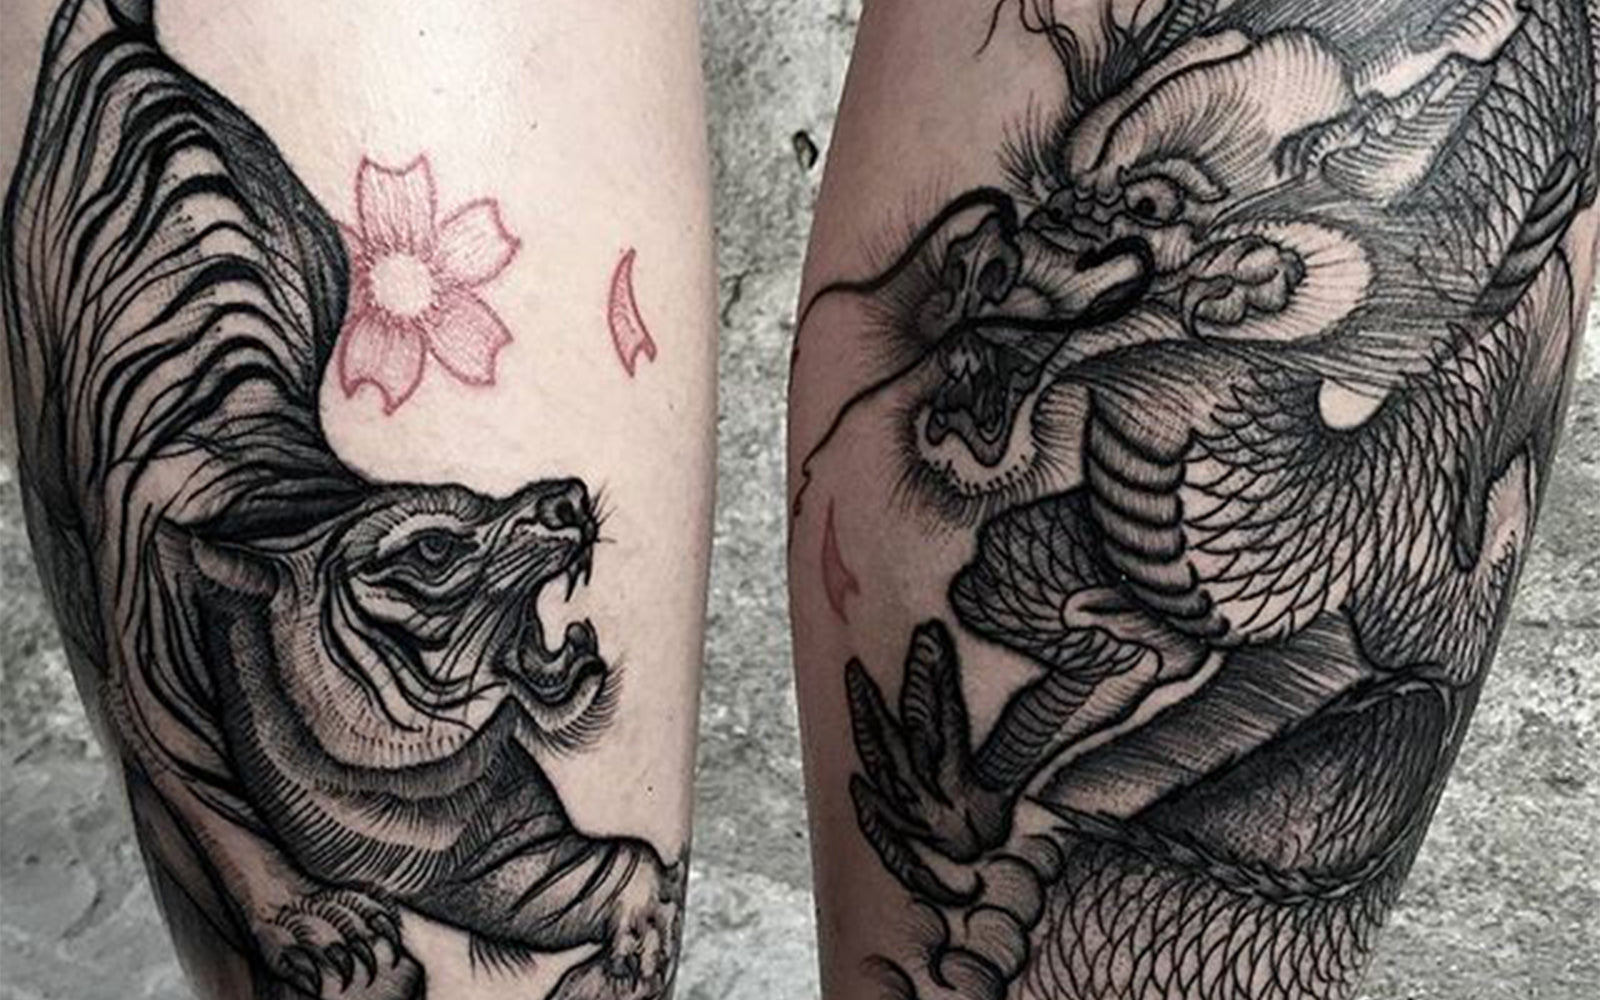 Ink Your Love With These Creative Couple Tattoos  KickAss Things  Small dragon  tattoos Dragon tattoo designs Matching tattoos